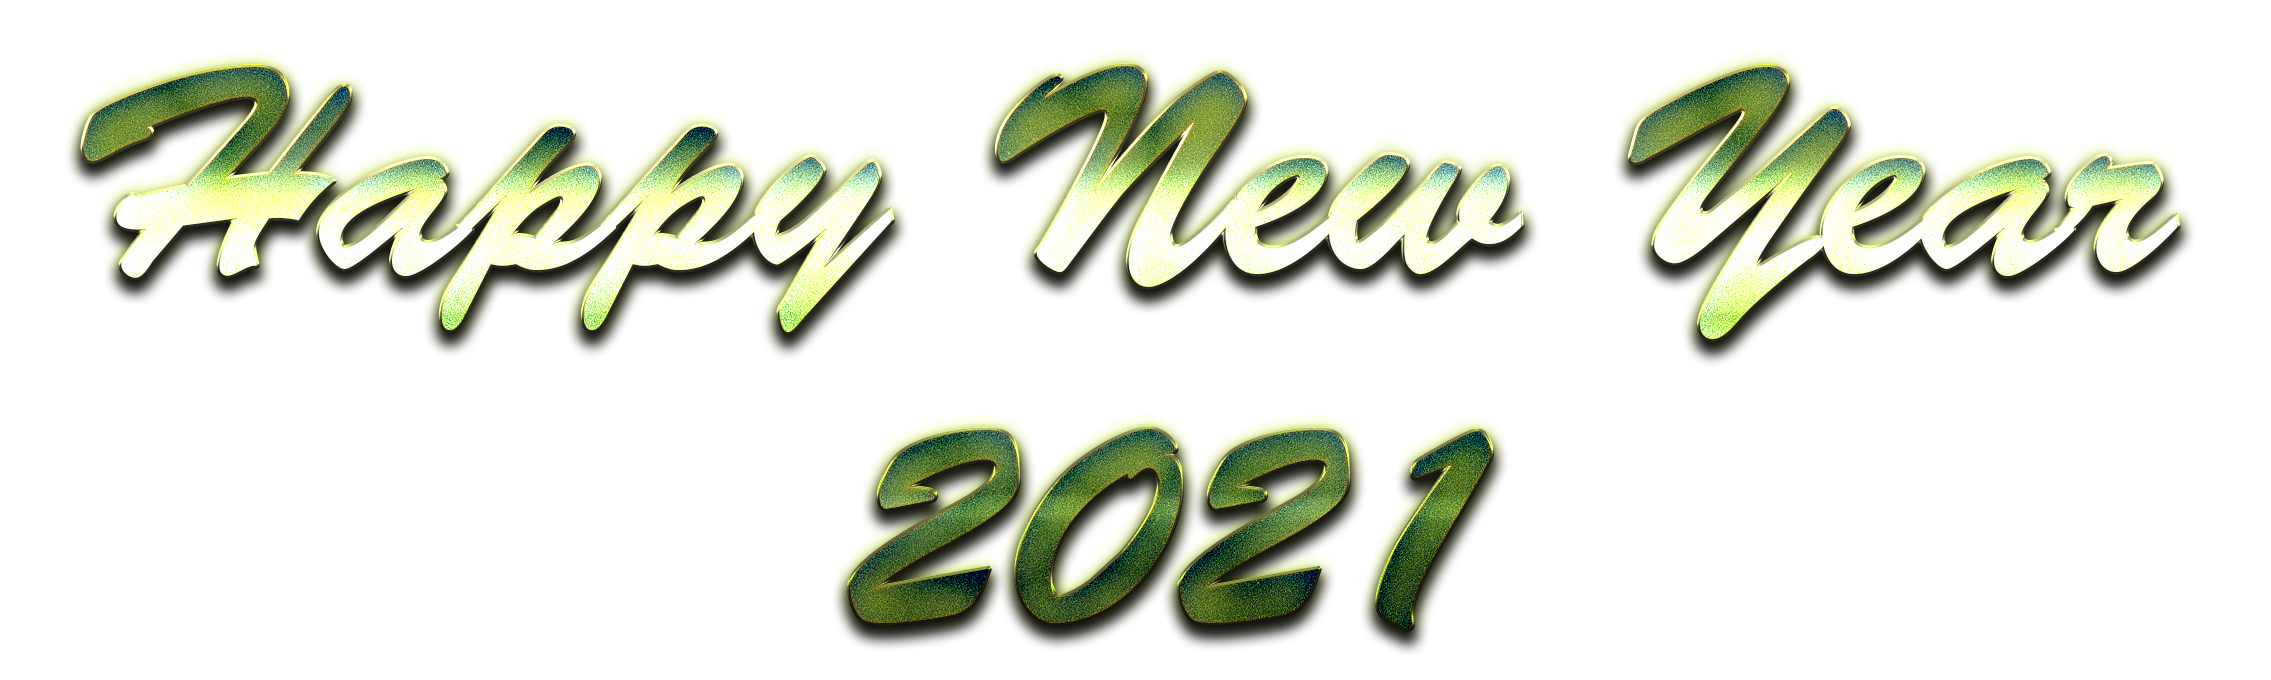 Happy New Year 2021 PNG